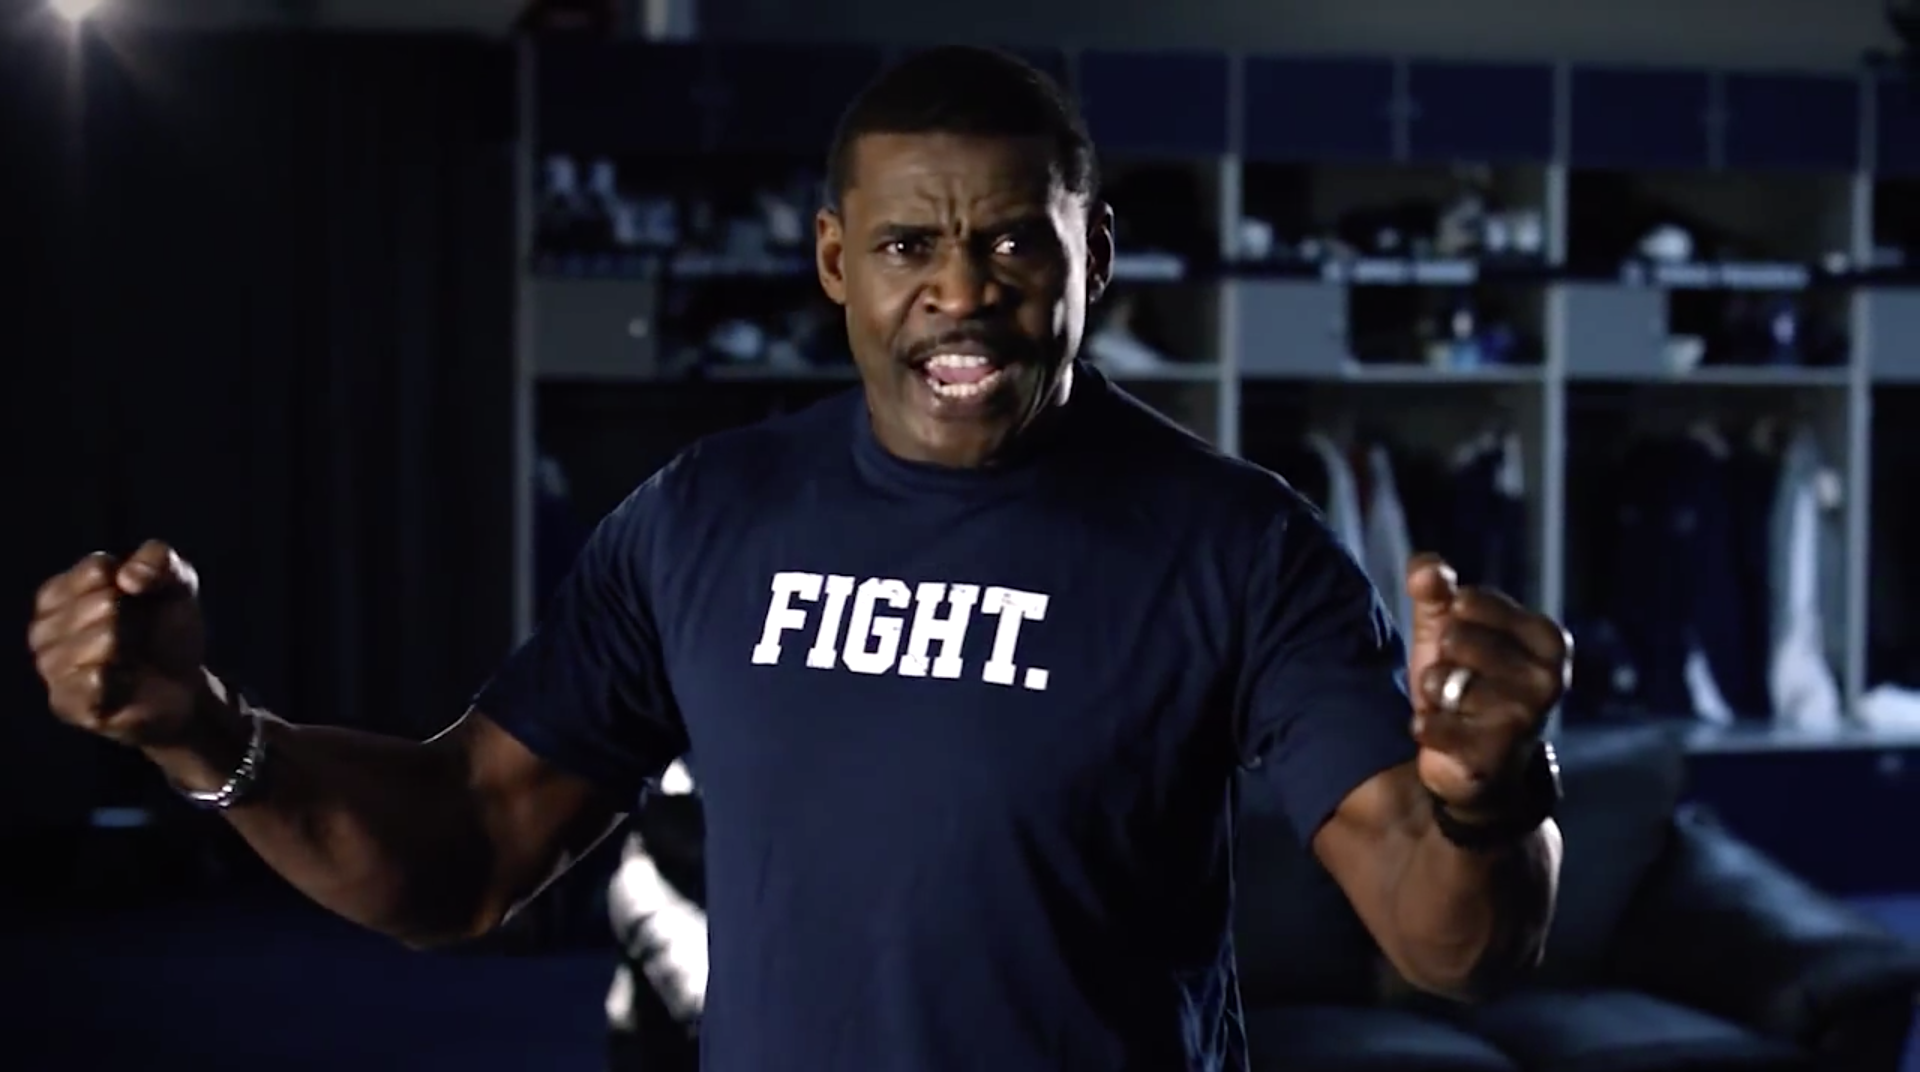 A man wearing a Dallas Cowboys navy blue shirt that reads "FIGHT" stands with his arms out like he is giving an impassioned speech - from Red Productions, a full service film & production company in Fort Worth Texas